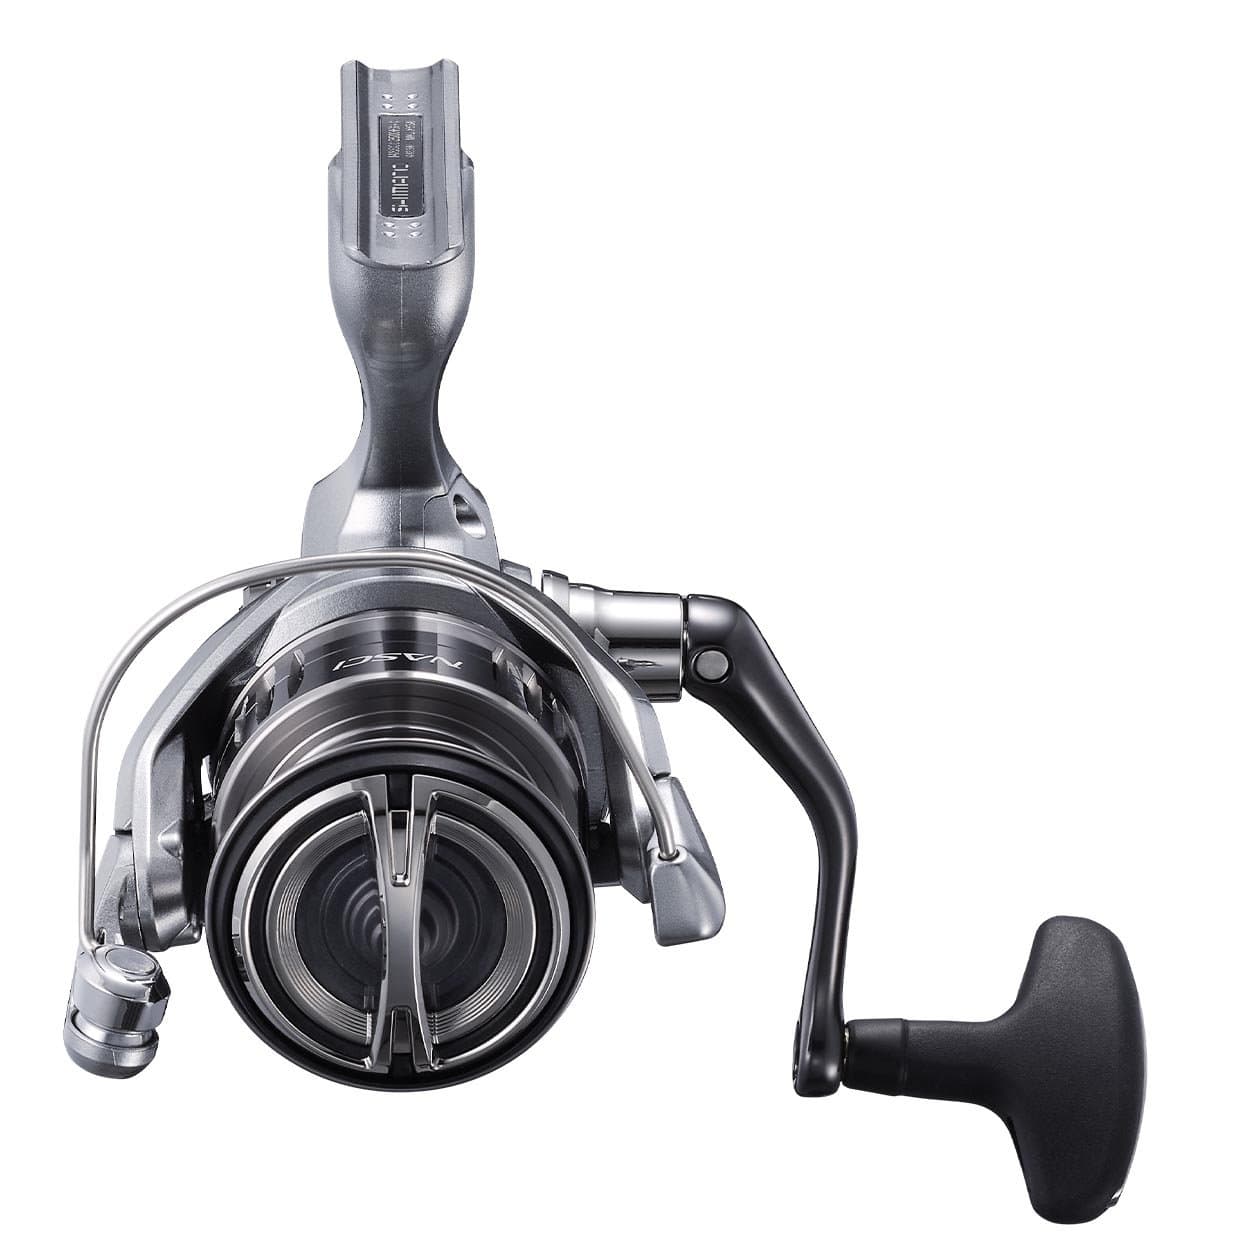 2021【Shimano】Stradic SW Spinning Reel (free gift Jig and 1 years